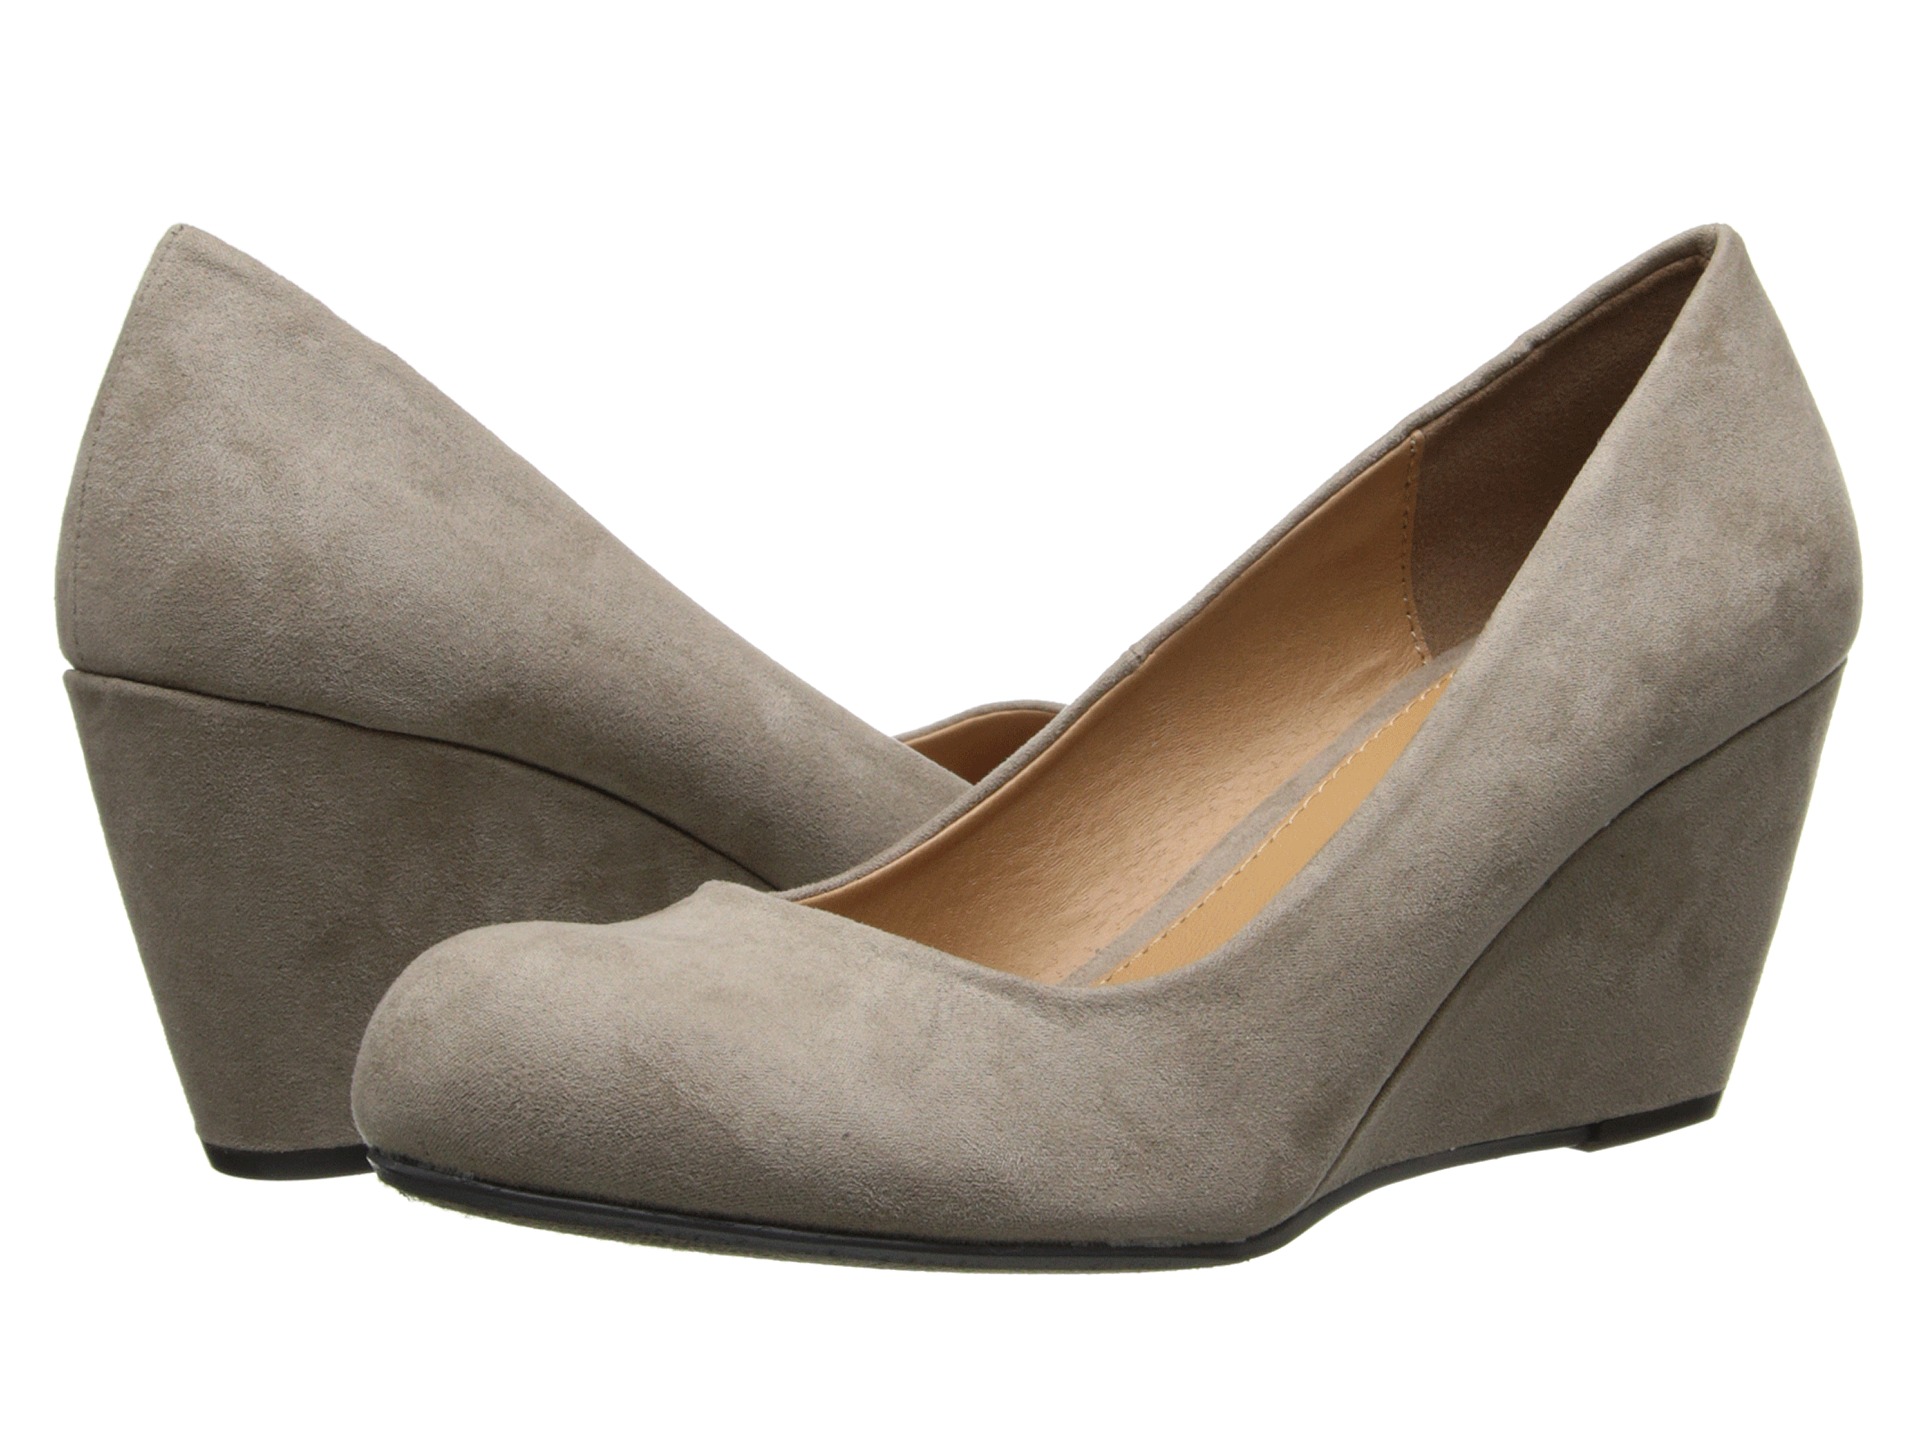 Dirty Laundry DL Not Me Dark Taupe - Zappos.com Free Shipping BOTH Ways